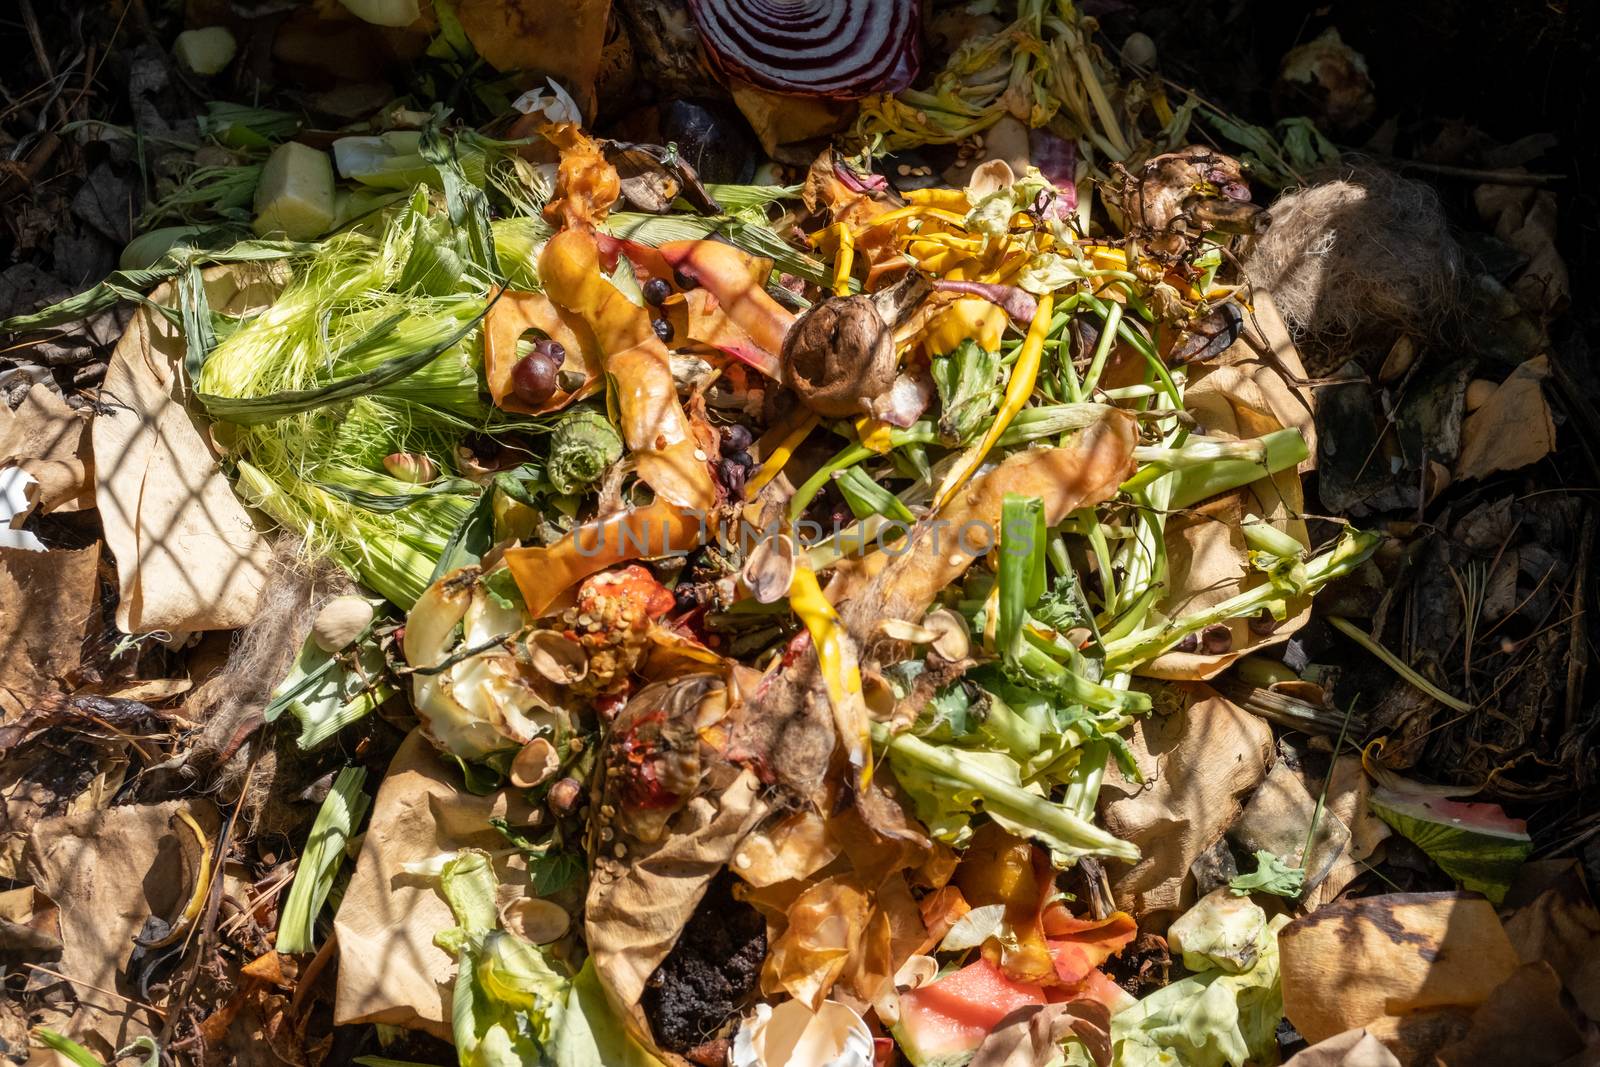 A Pile of Compost with Kitchen Waste by colintemple